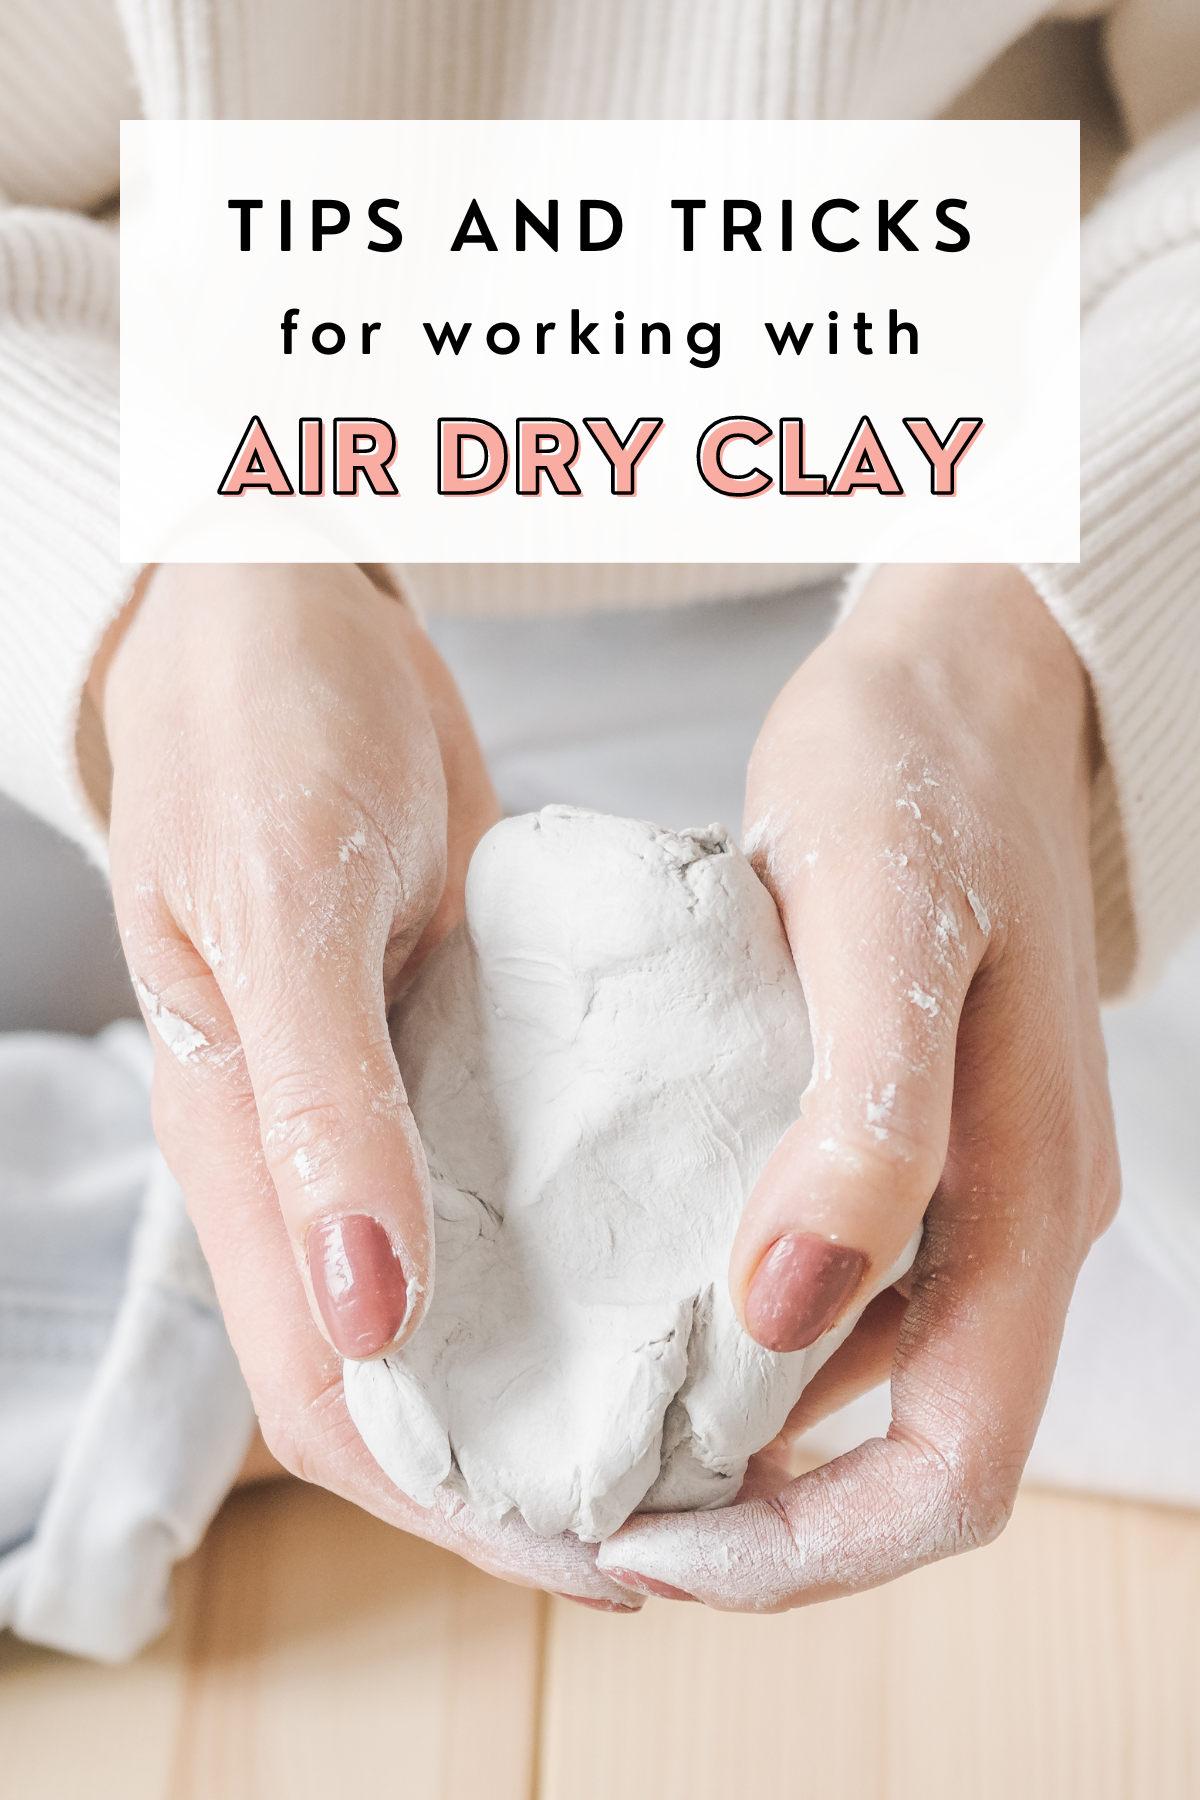 BEST AIR DRY CLAY TIPS AND TRICKS FOR BEGINNERS (helpful) 